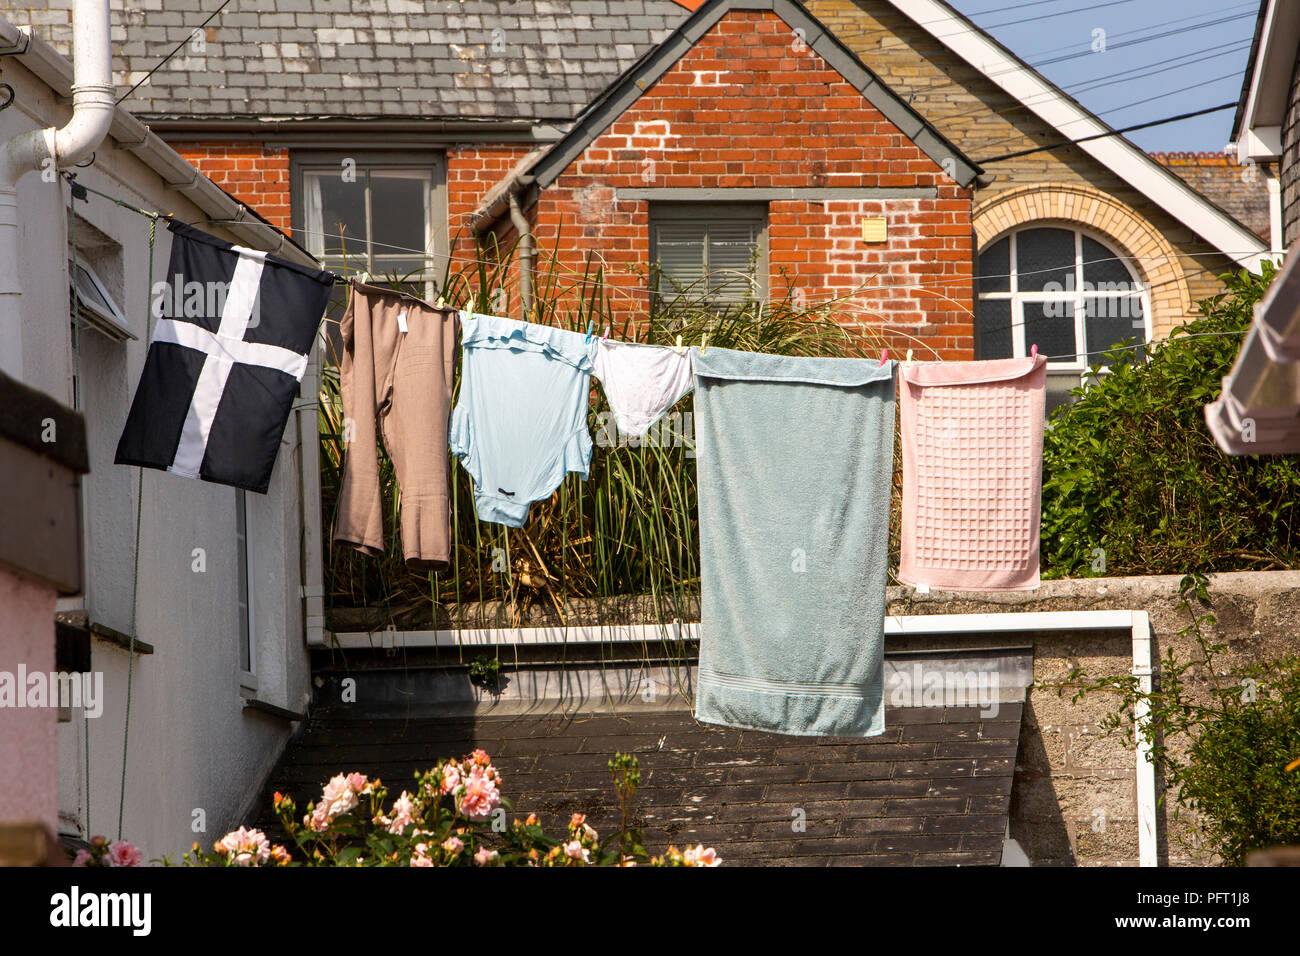 UK, Cornwall, Padstow, Middle Street, washing hanging on line including Cornish flag Stock Photo